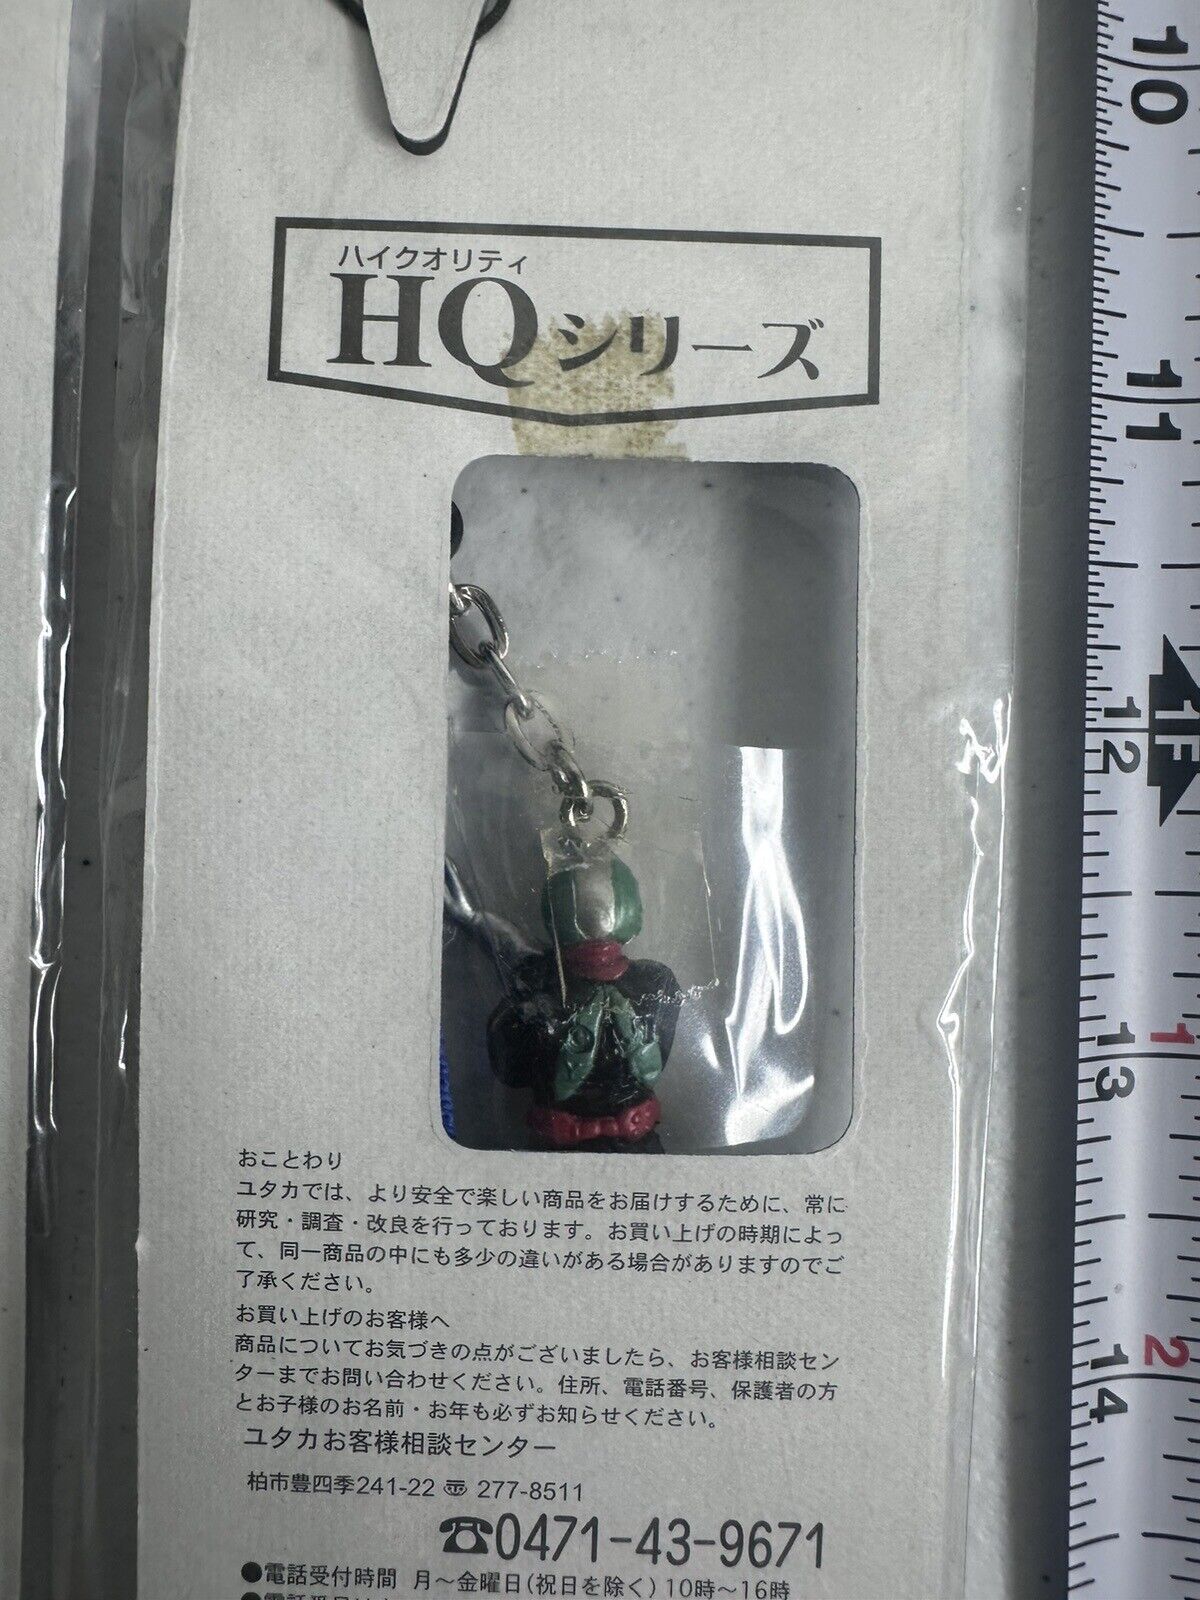 New Collectible Masked Rider Phone Straps - Sealed 90s Retro Anime Accessories - TreasuTiques